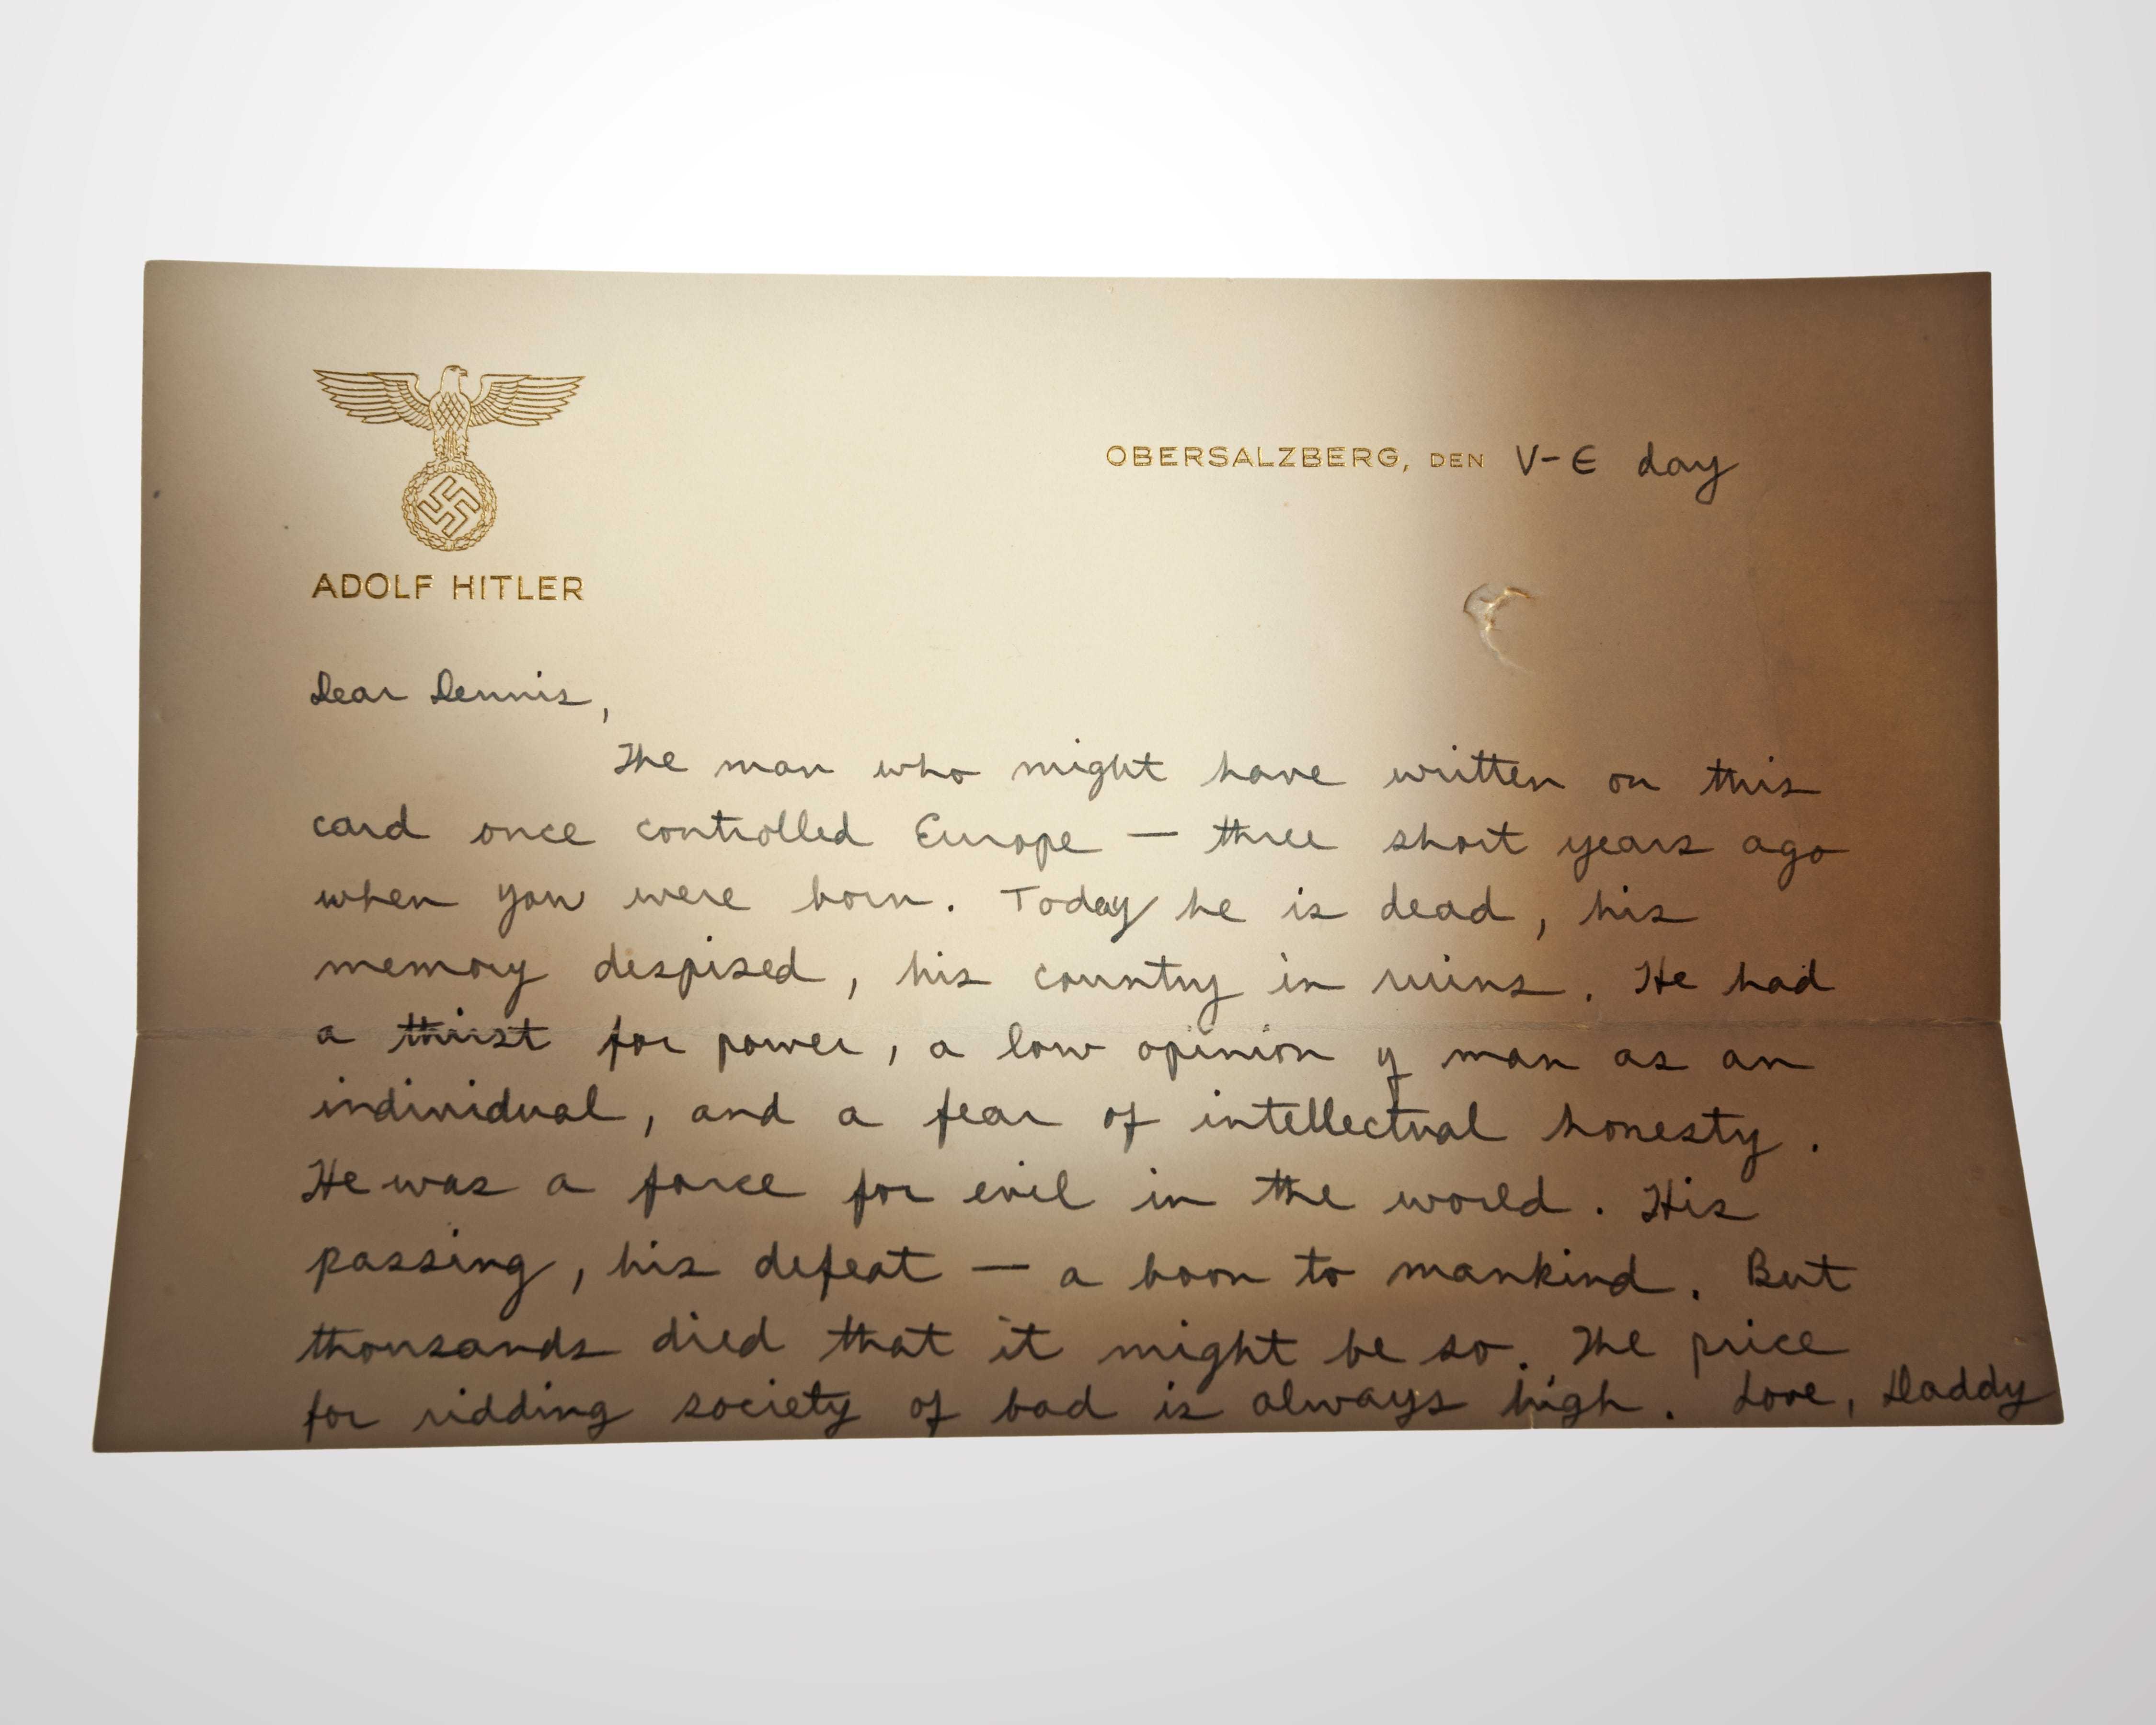 A letter written by Richard Helms on Adolf Hitler's stationery